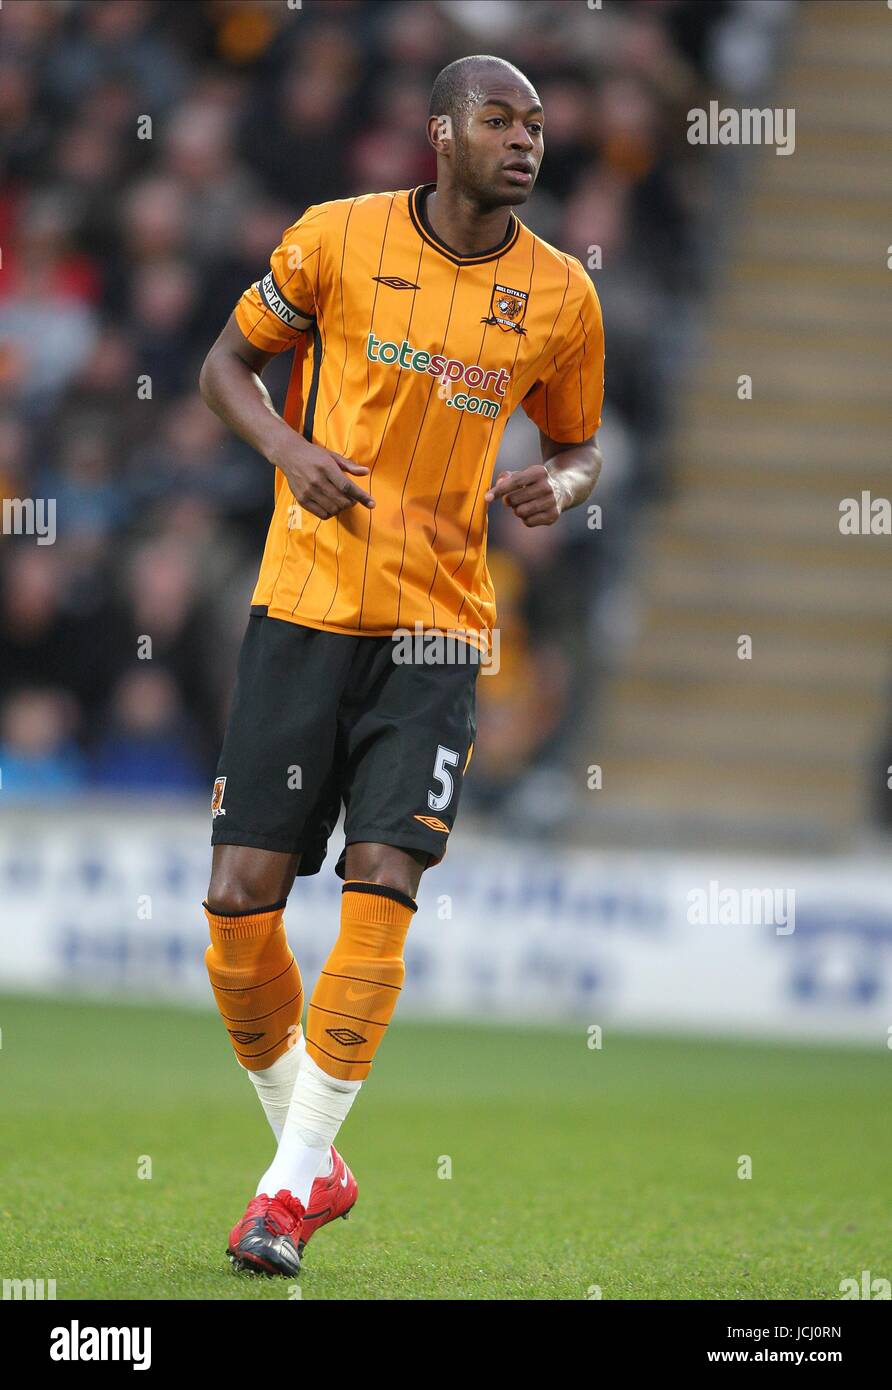 ANTHONY GARDNER HULL CITY FC HULL CITY V BLACKBURN ROVERS KC STADIUM, HULL, ENGLAND 12 December 2009 GAB6214     WARNING! This Photograph May Only Be Used For Newspaper And/Or Magazine Editorial Purposes. May Not Be Used For, Internet/Online Usage Nor For Publications Involving 1 player, 1 Club Or 1 Competition, Without Written Authorisation From Football DataCo Ltd. For Any Queries, Please Contact Football DataCo Ltd on +44 (0) 207 864 9121 Stock Photo